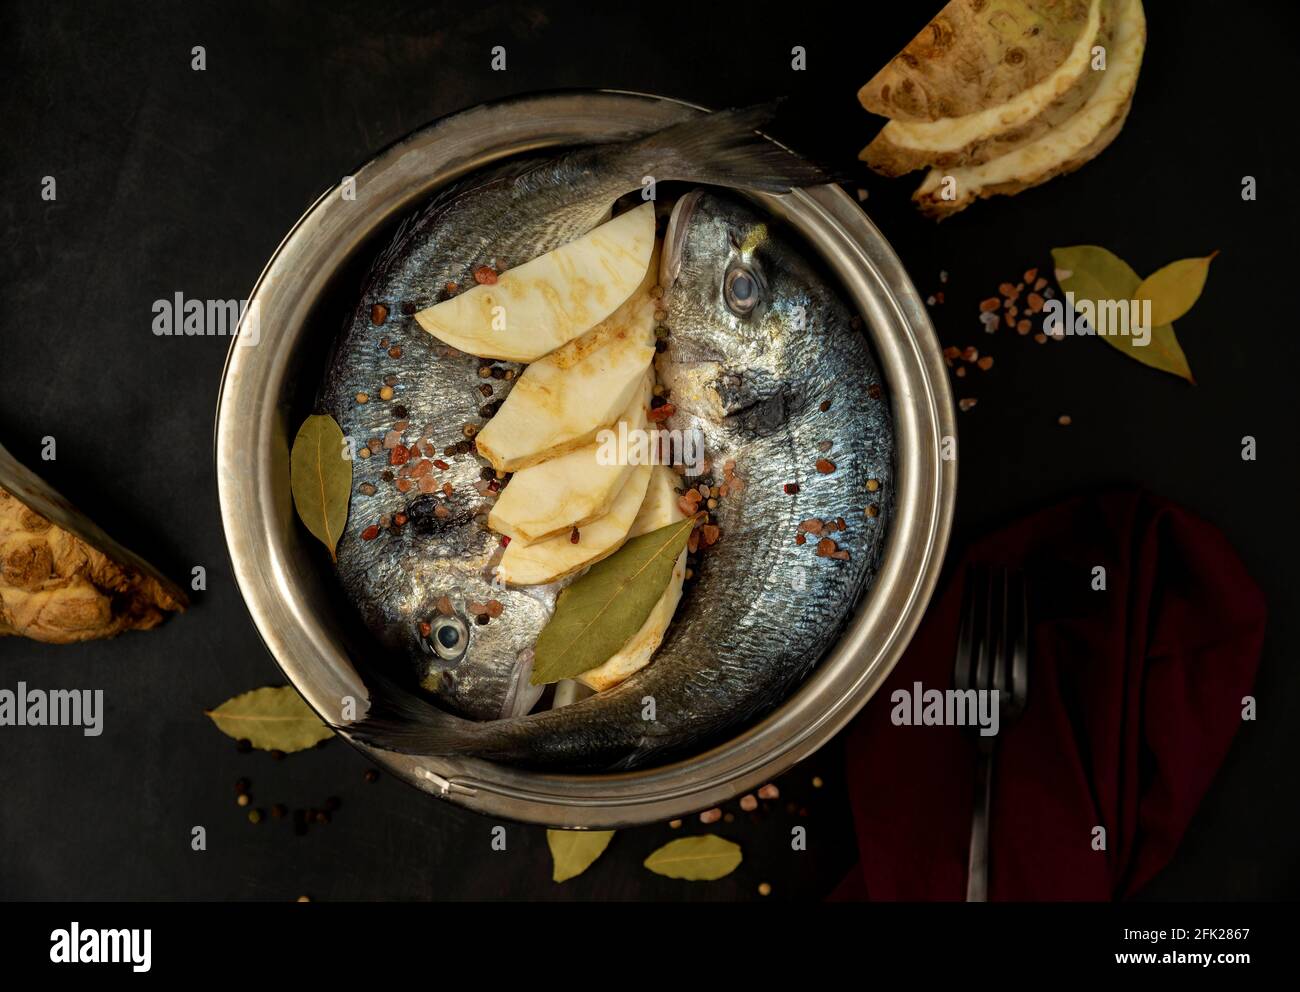 Two raw sea bream fish in a cooking pot on black background with bay leaf, salt, knob celery and black pepper Dark mood photography Stock Photo